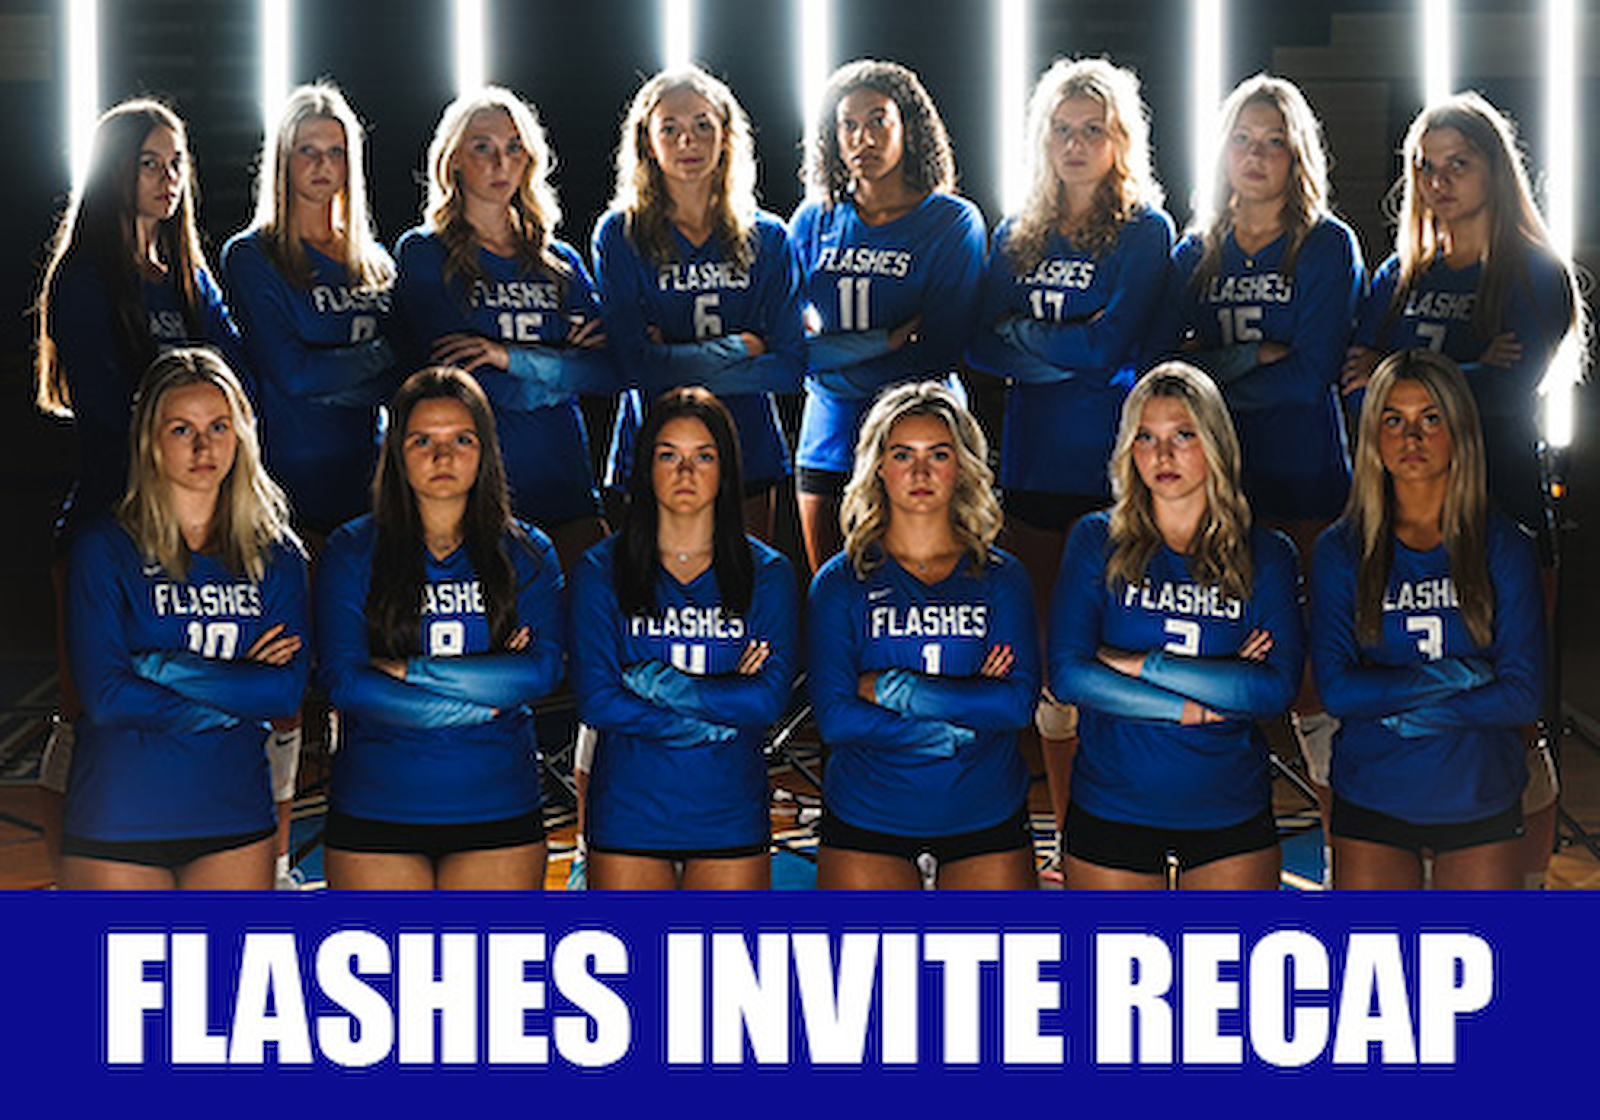 Flashes take 2nd at Flashes Invite cover photo